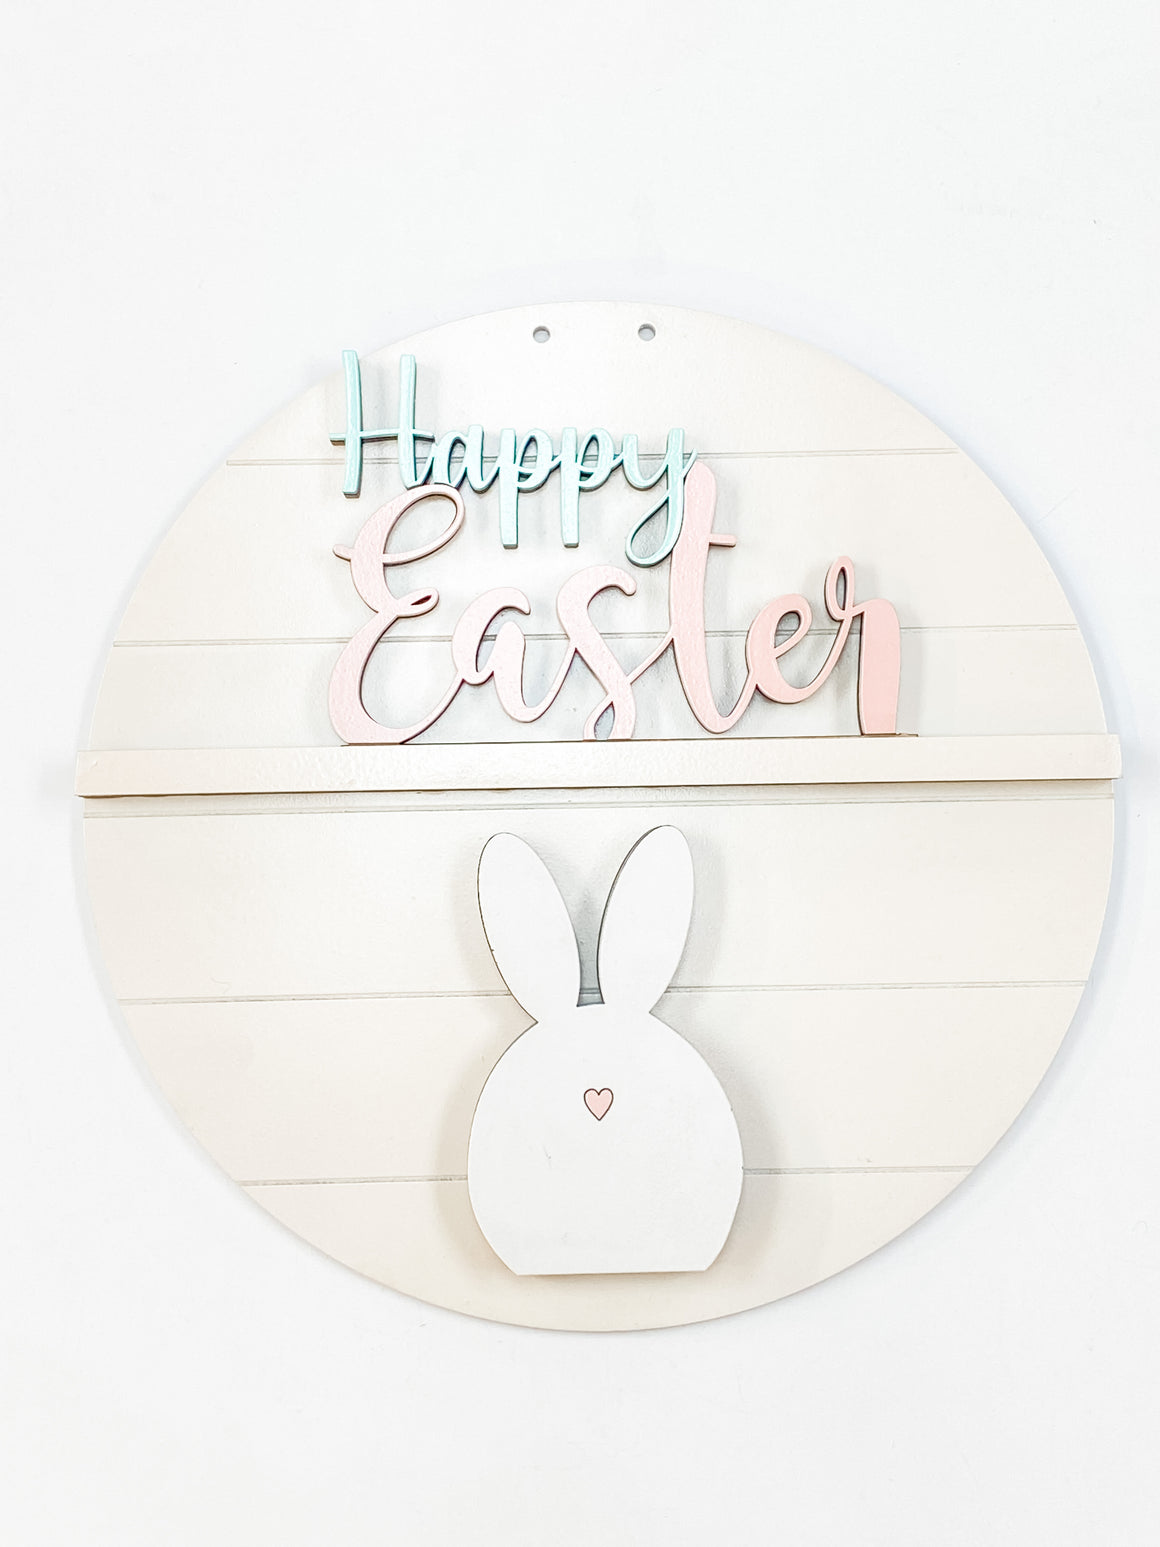 Customizable DIY Sign Kit | Words | Happy Easter